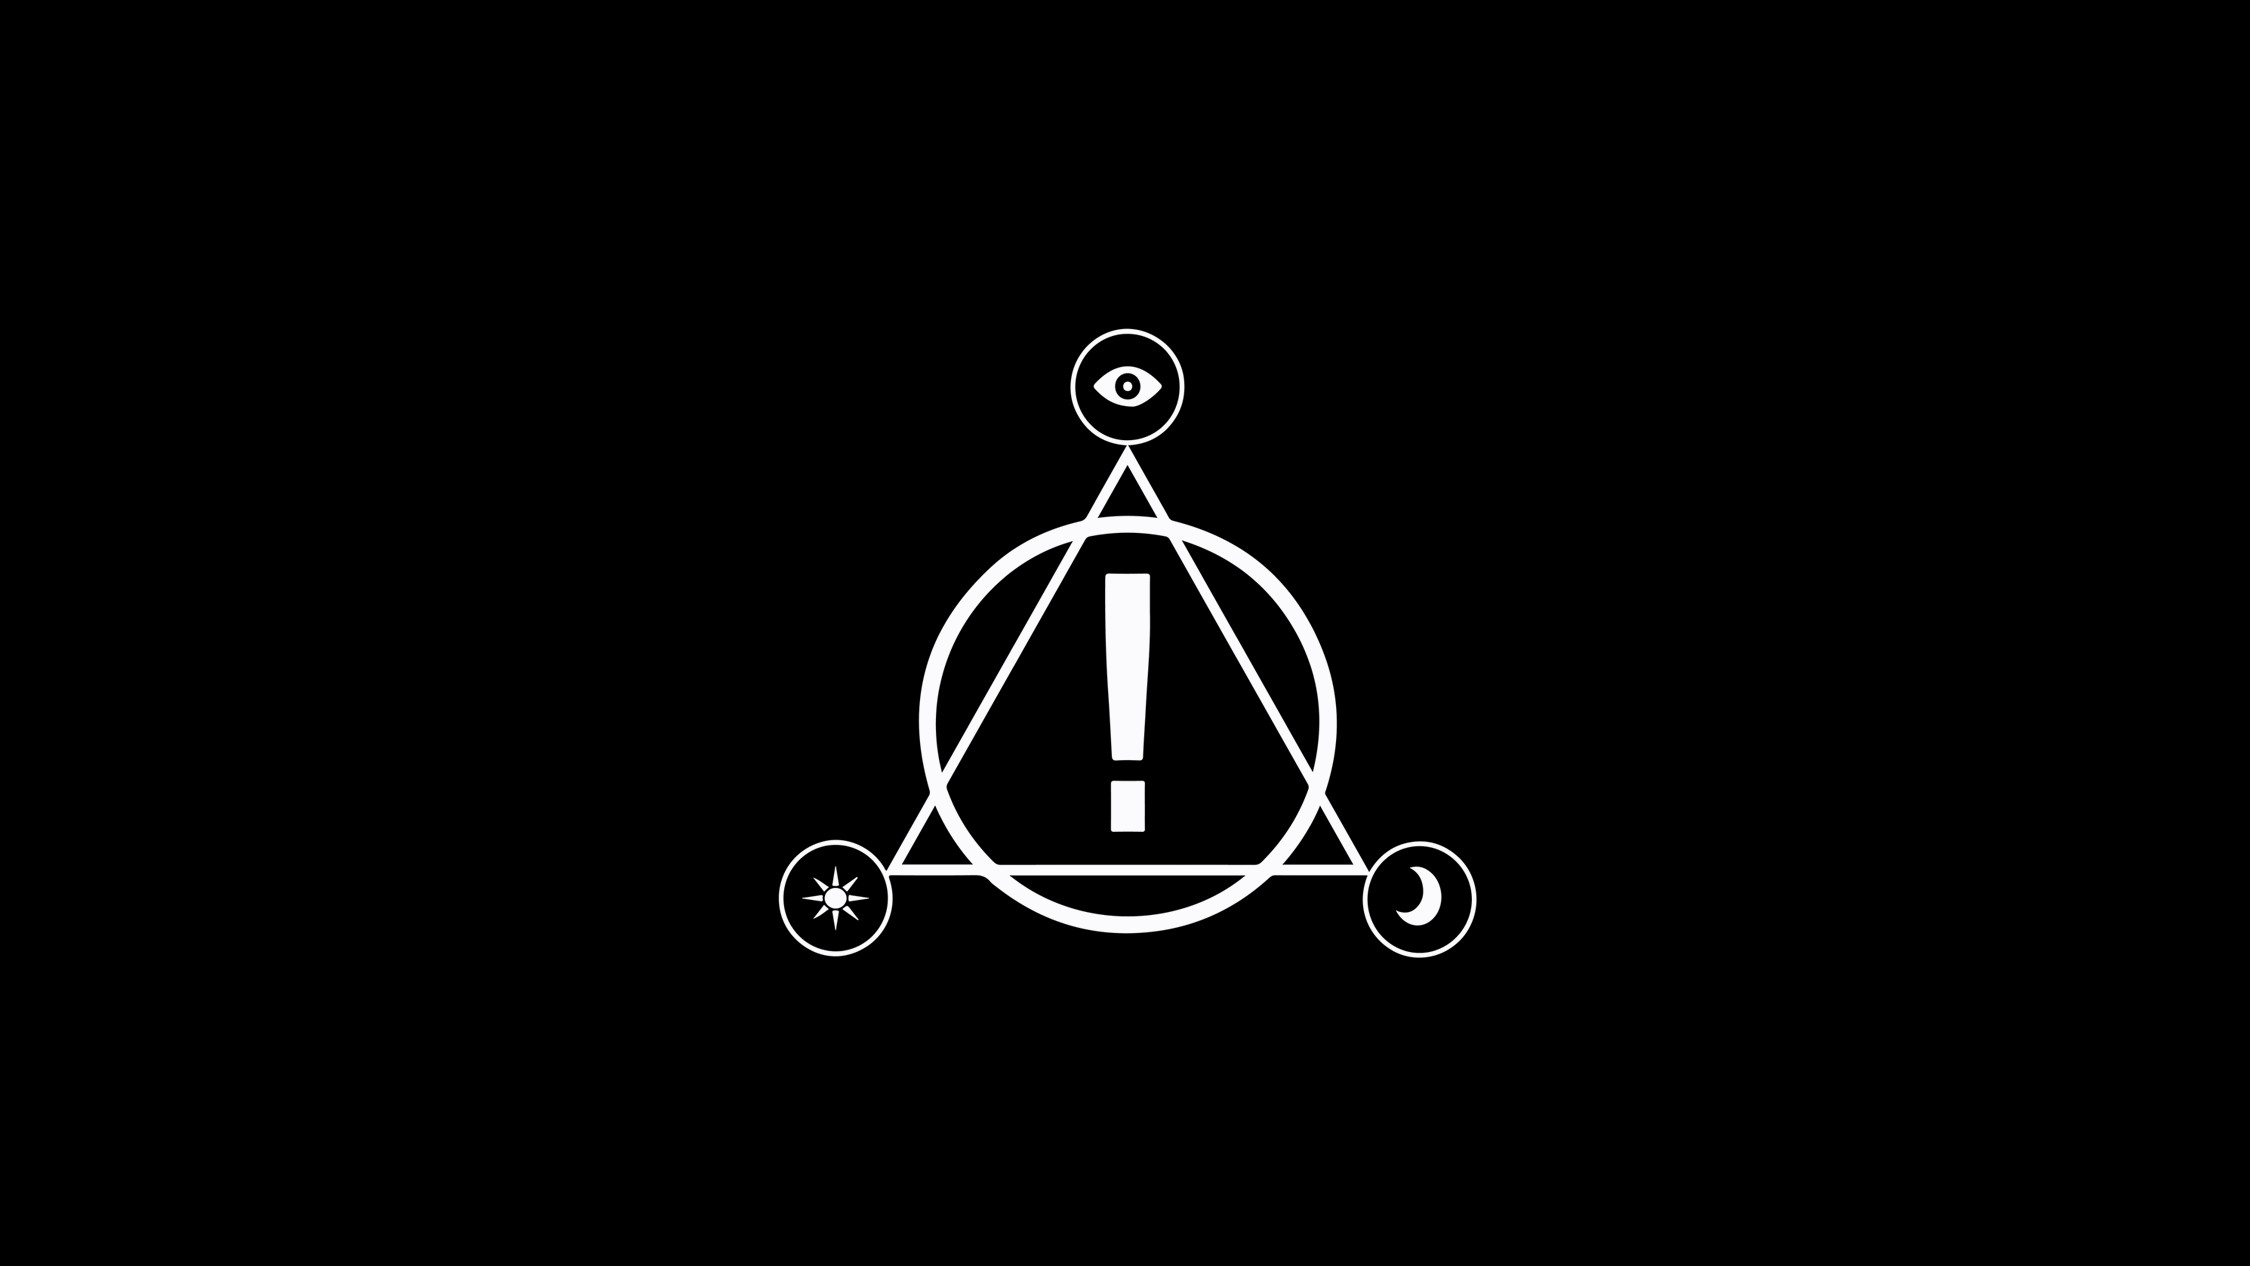 2250x1266 What does this Panic! At The Disco logo mean?